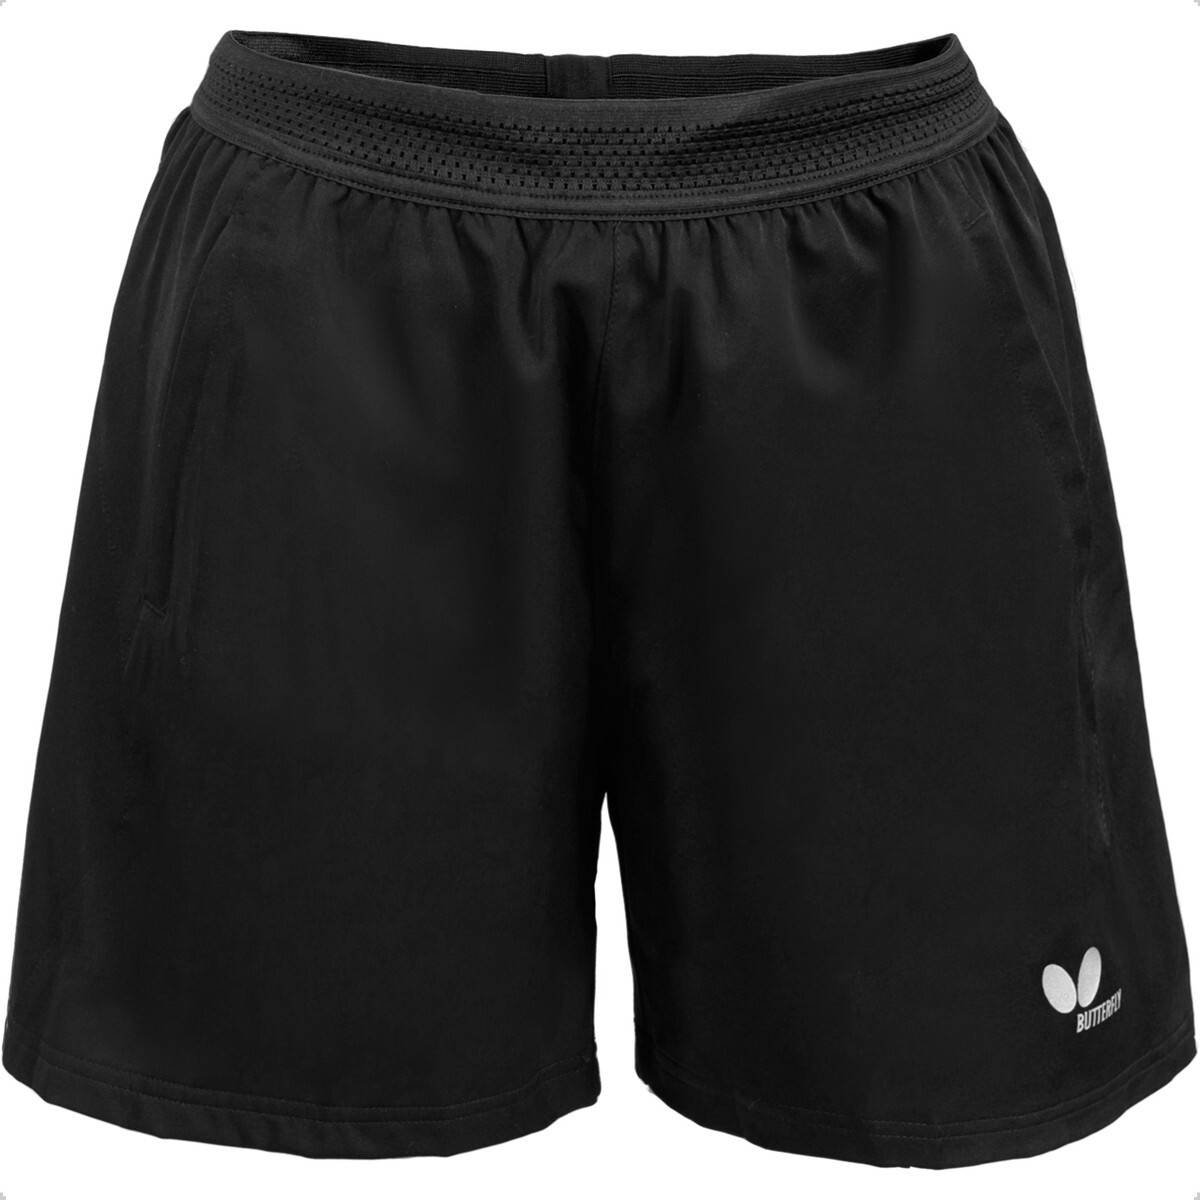 Butterfly Chito Shorts - Black